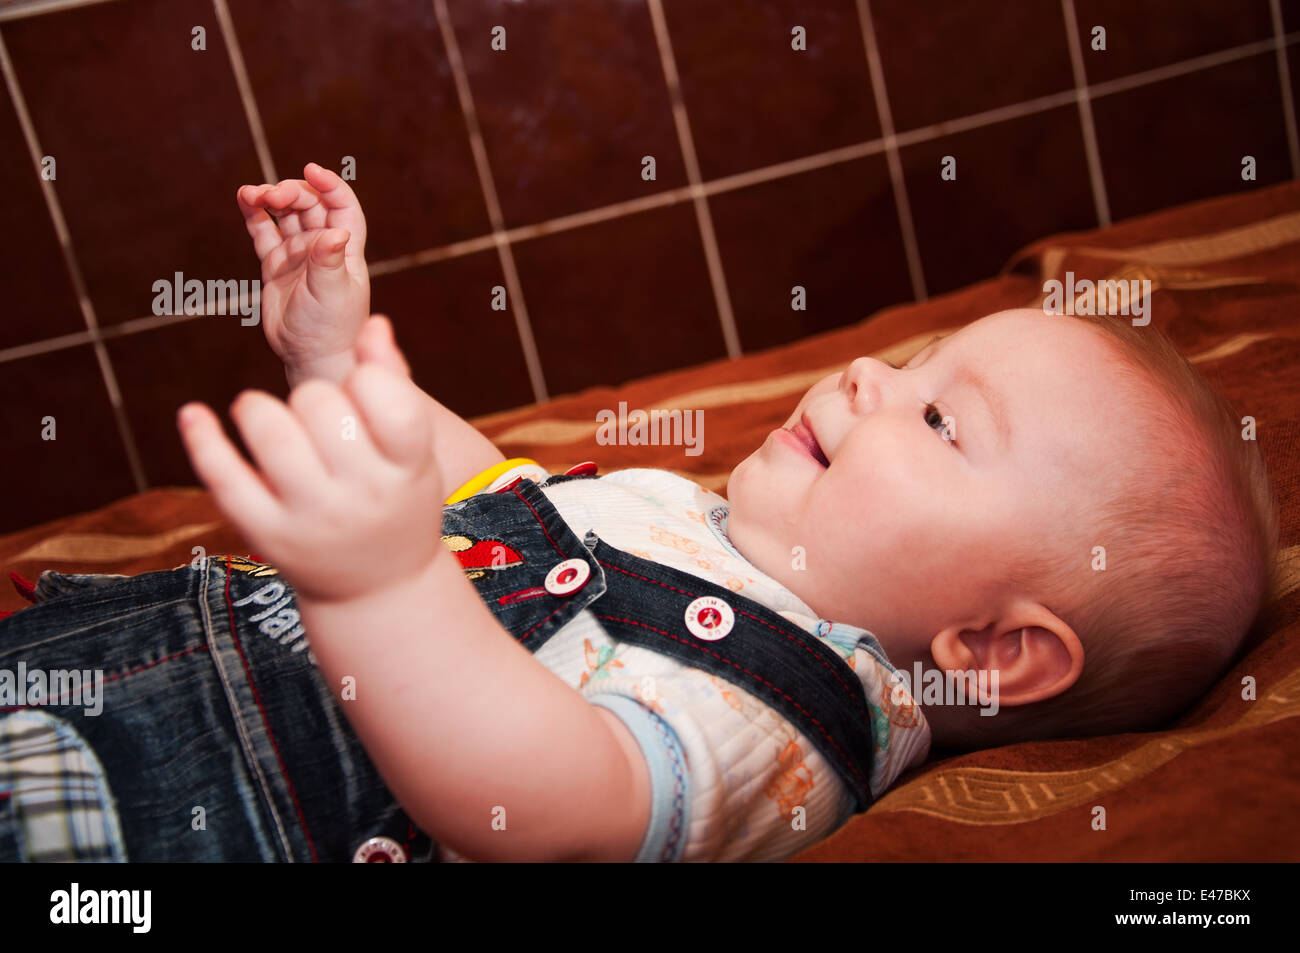 Cute little baby lying on bed and smiling Stock Photo